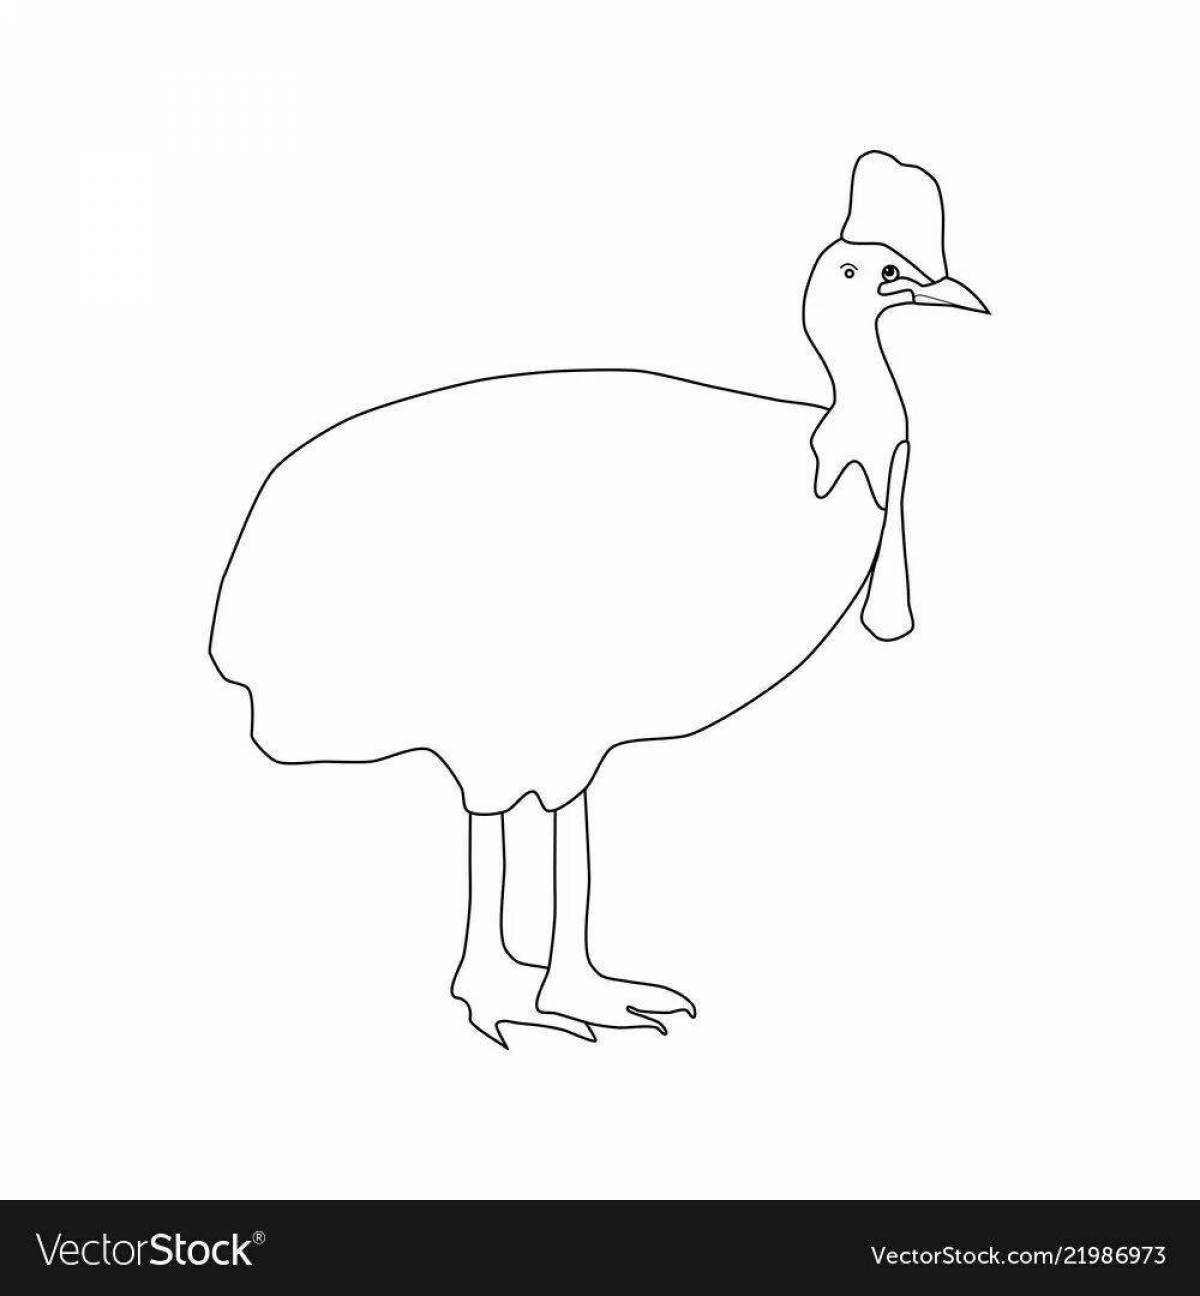 Playful cassowary coloring for kids